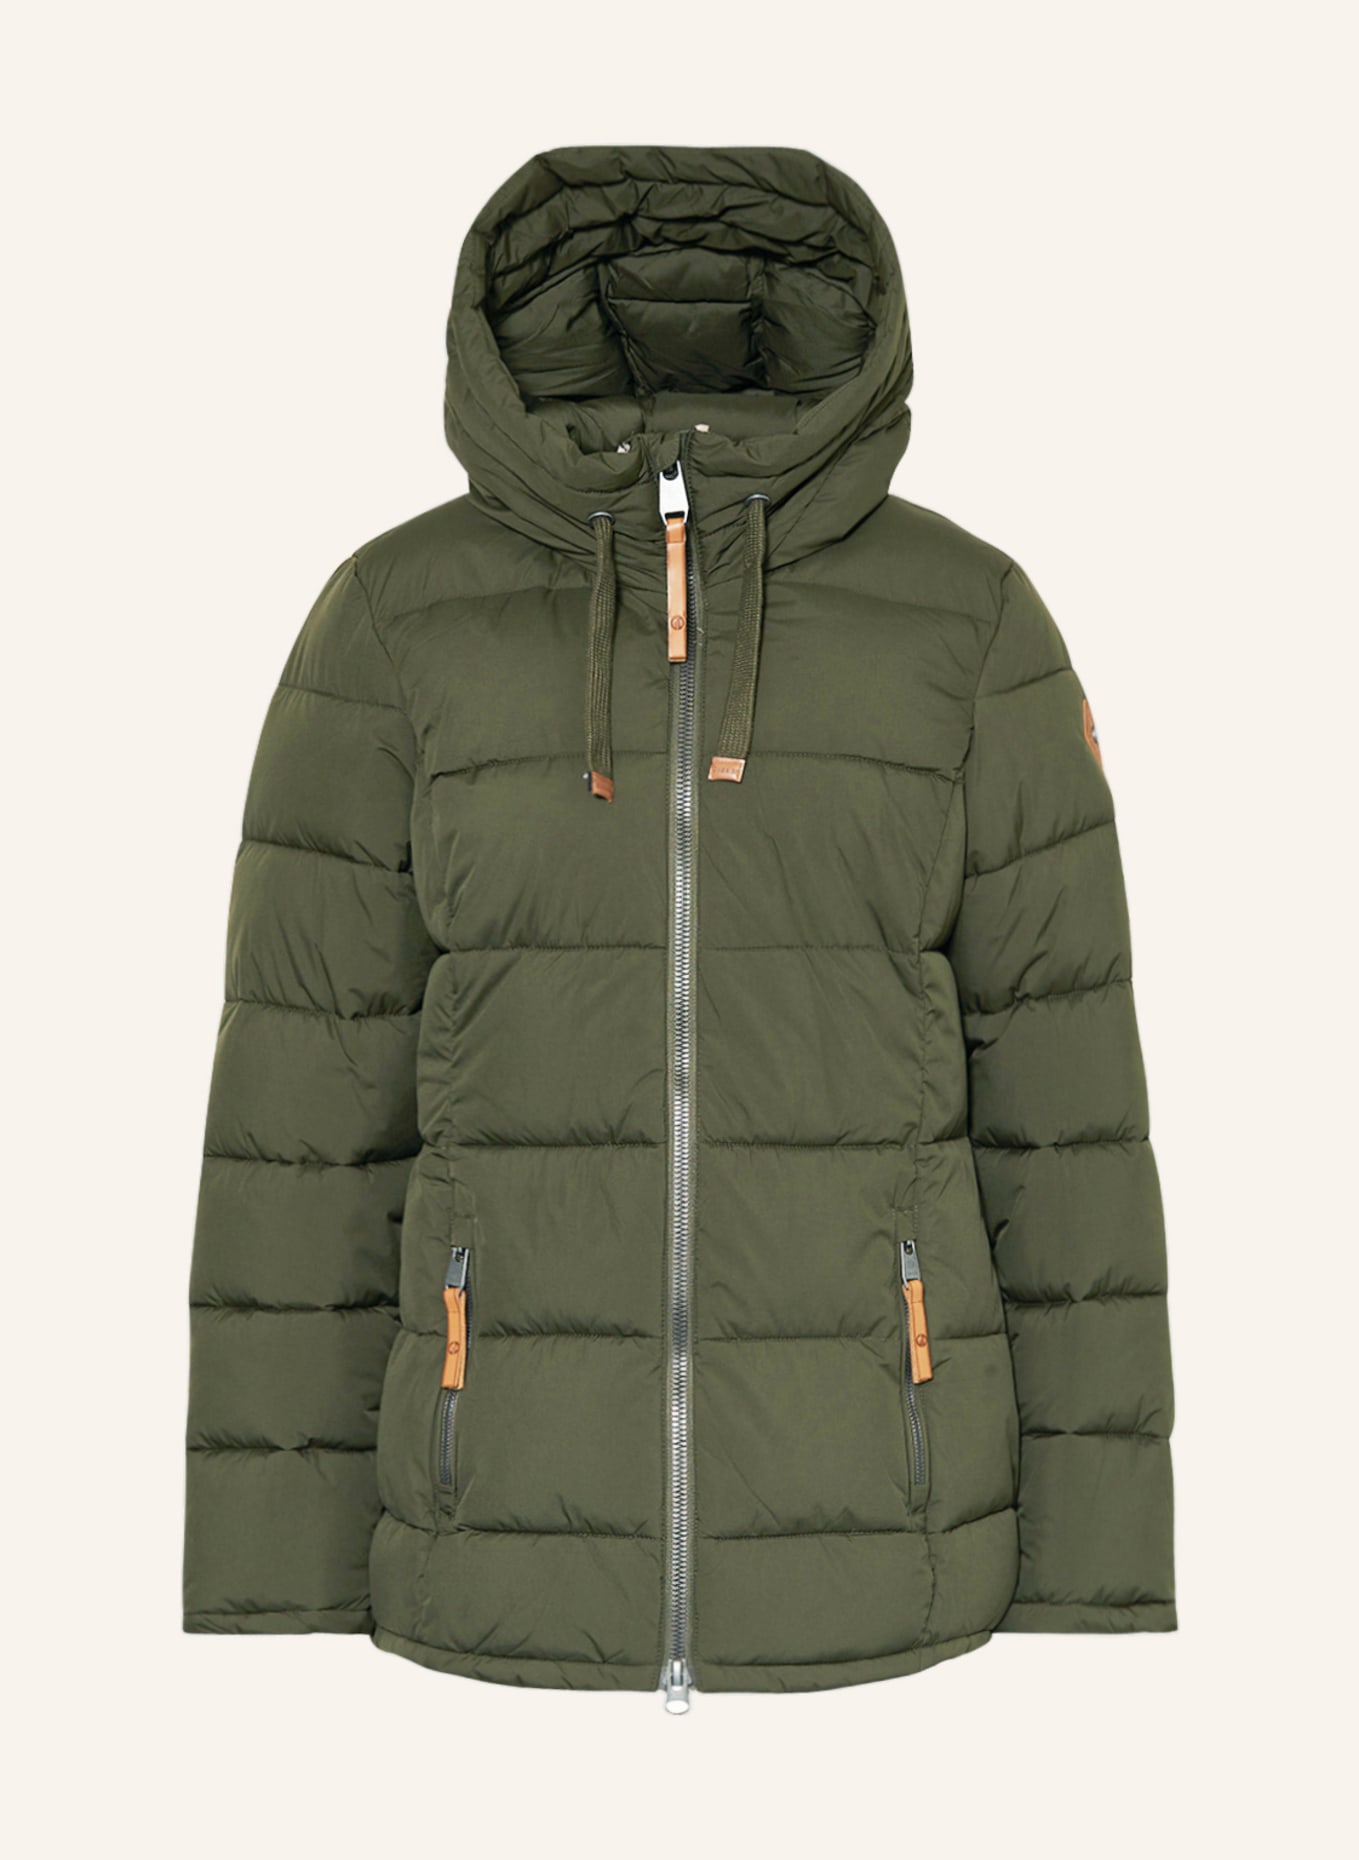 in by Quilted killtec olive G.I.G.A. jacket DX